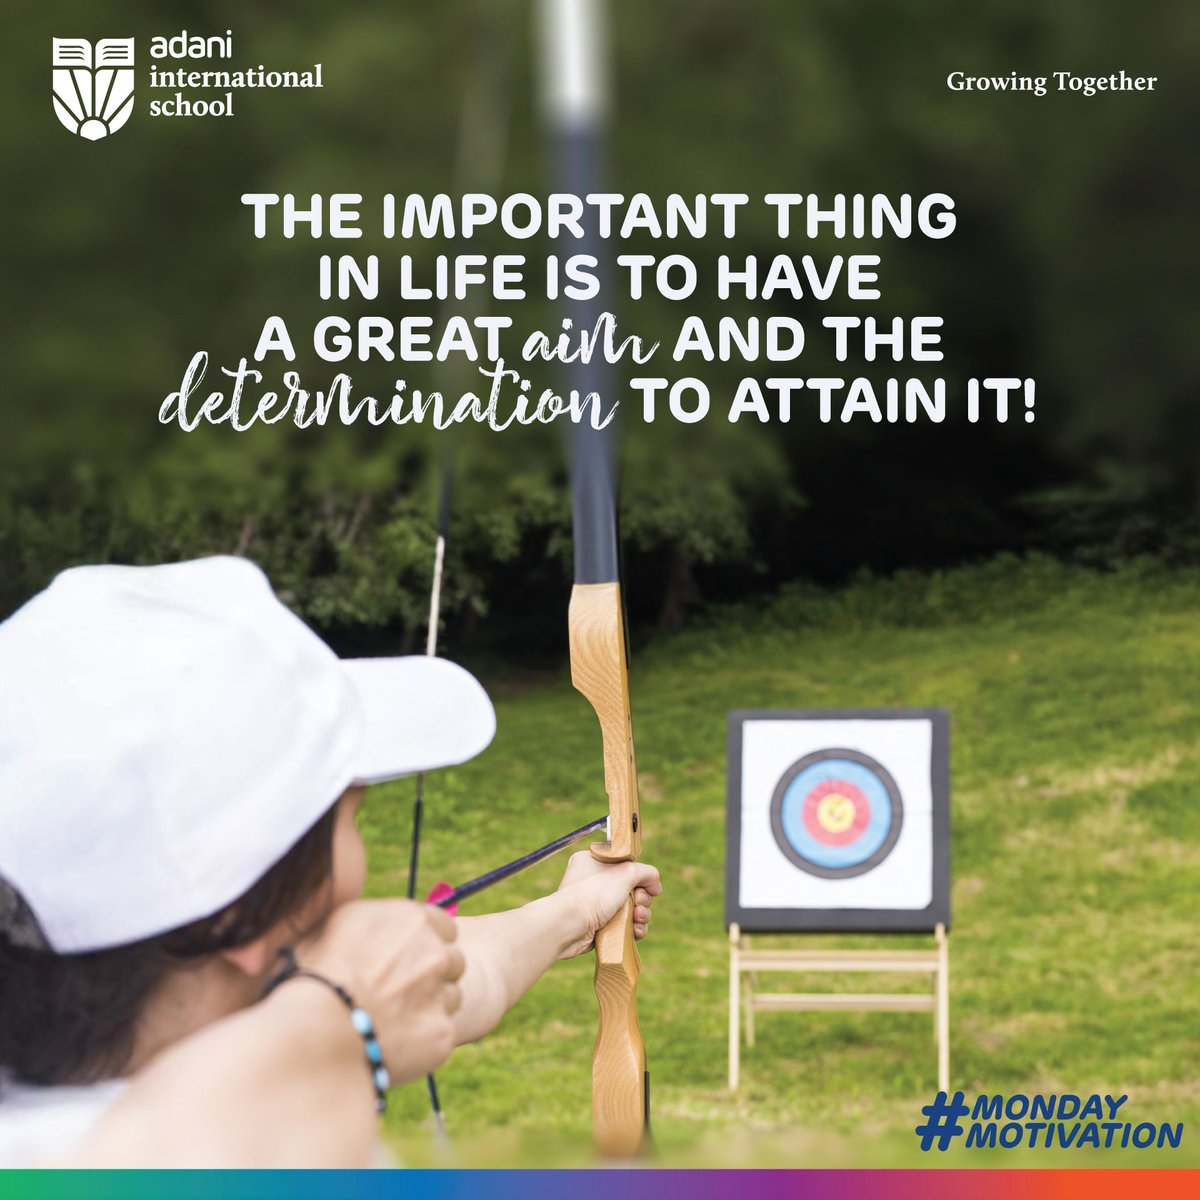 We believe in empowering our students to aim high and tackle challenges with unwavering determination. Setting the goals high and pushing the limits to show the world what we're capable of achieving!
#GrowingTogether

#AdanilnternationalSchool
#SchoolsInAhmedabad